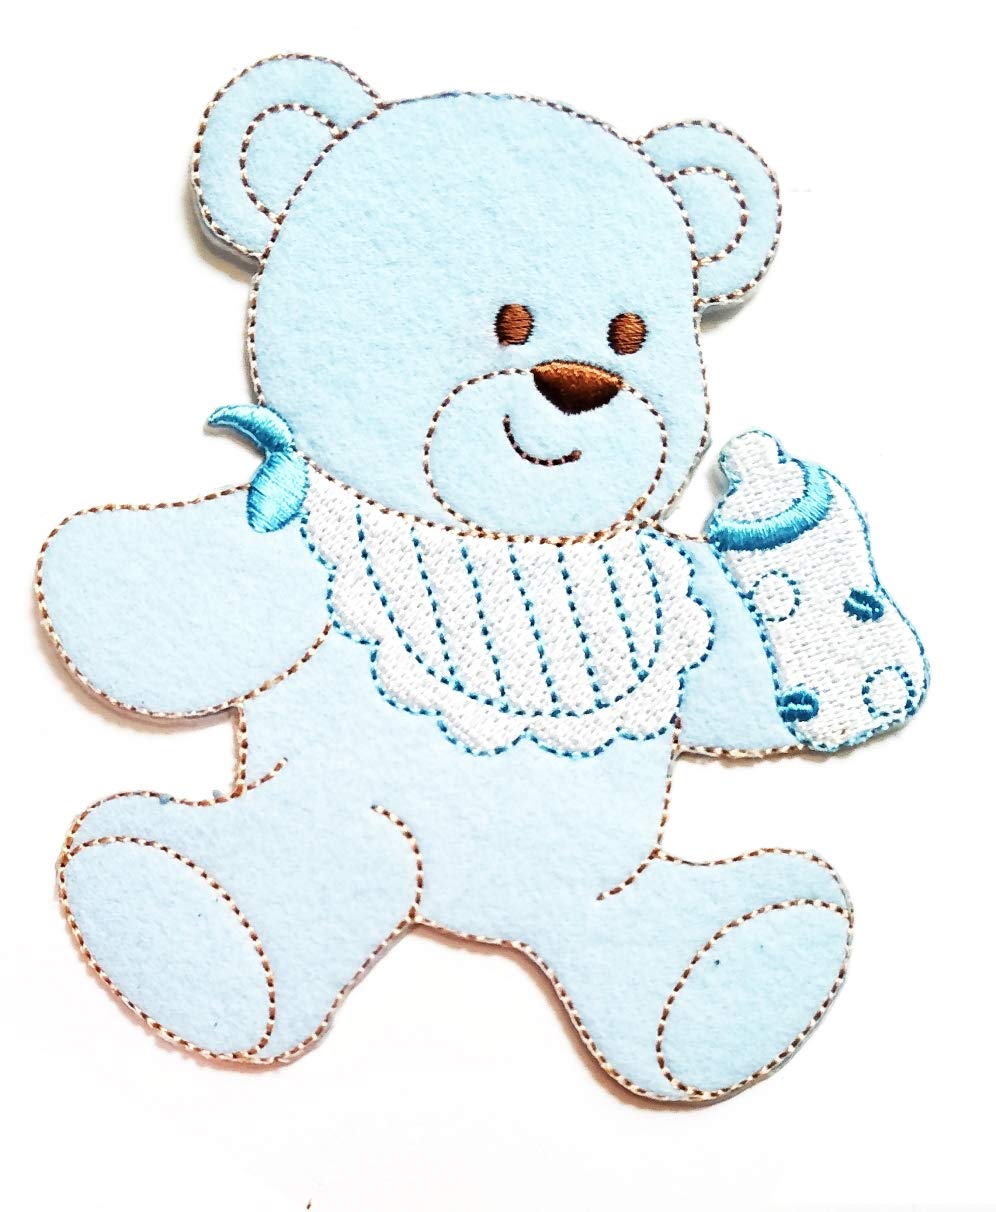 Nipitshop Patches Cute Lovely Baby Teddy Bear Bottle of Milk Blue Cartoon Embroidered Patches Embroidery Patches Iron On Patches Sew On Applique Patch Cool Patches for Men Women Boys Girls Kids